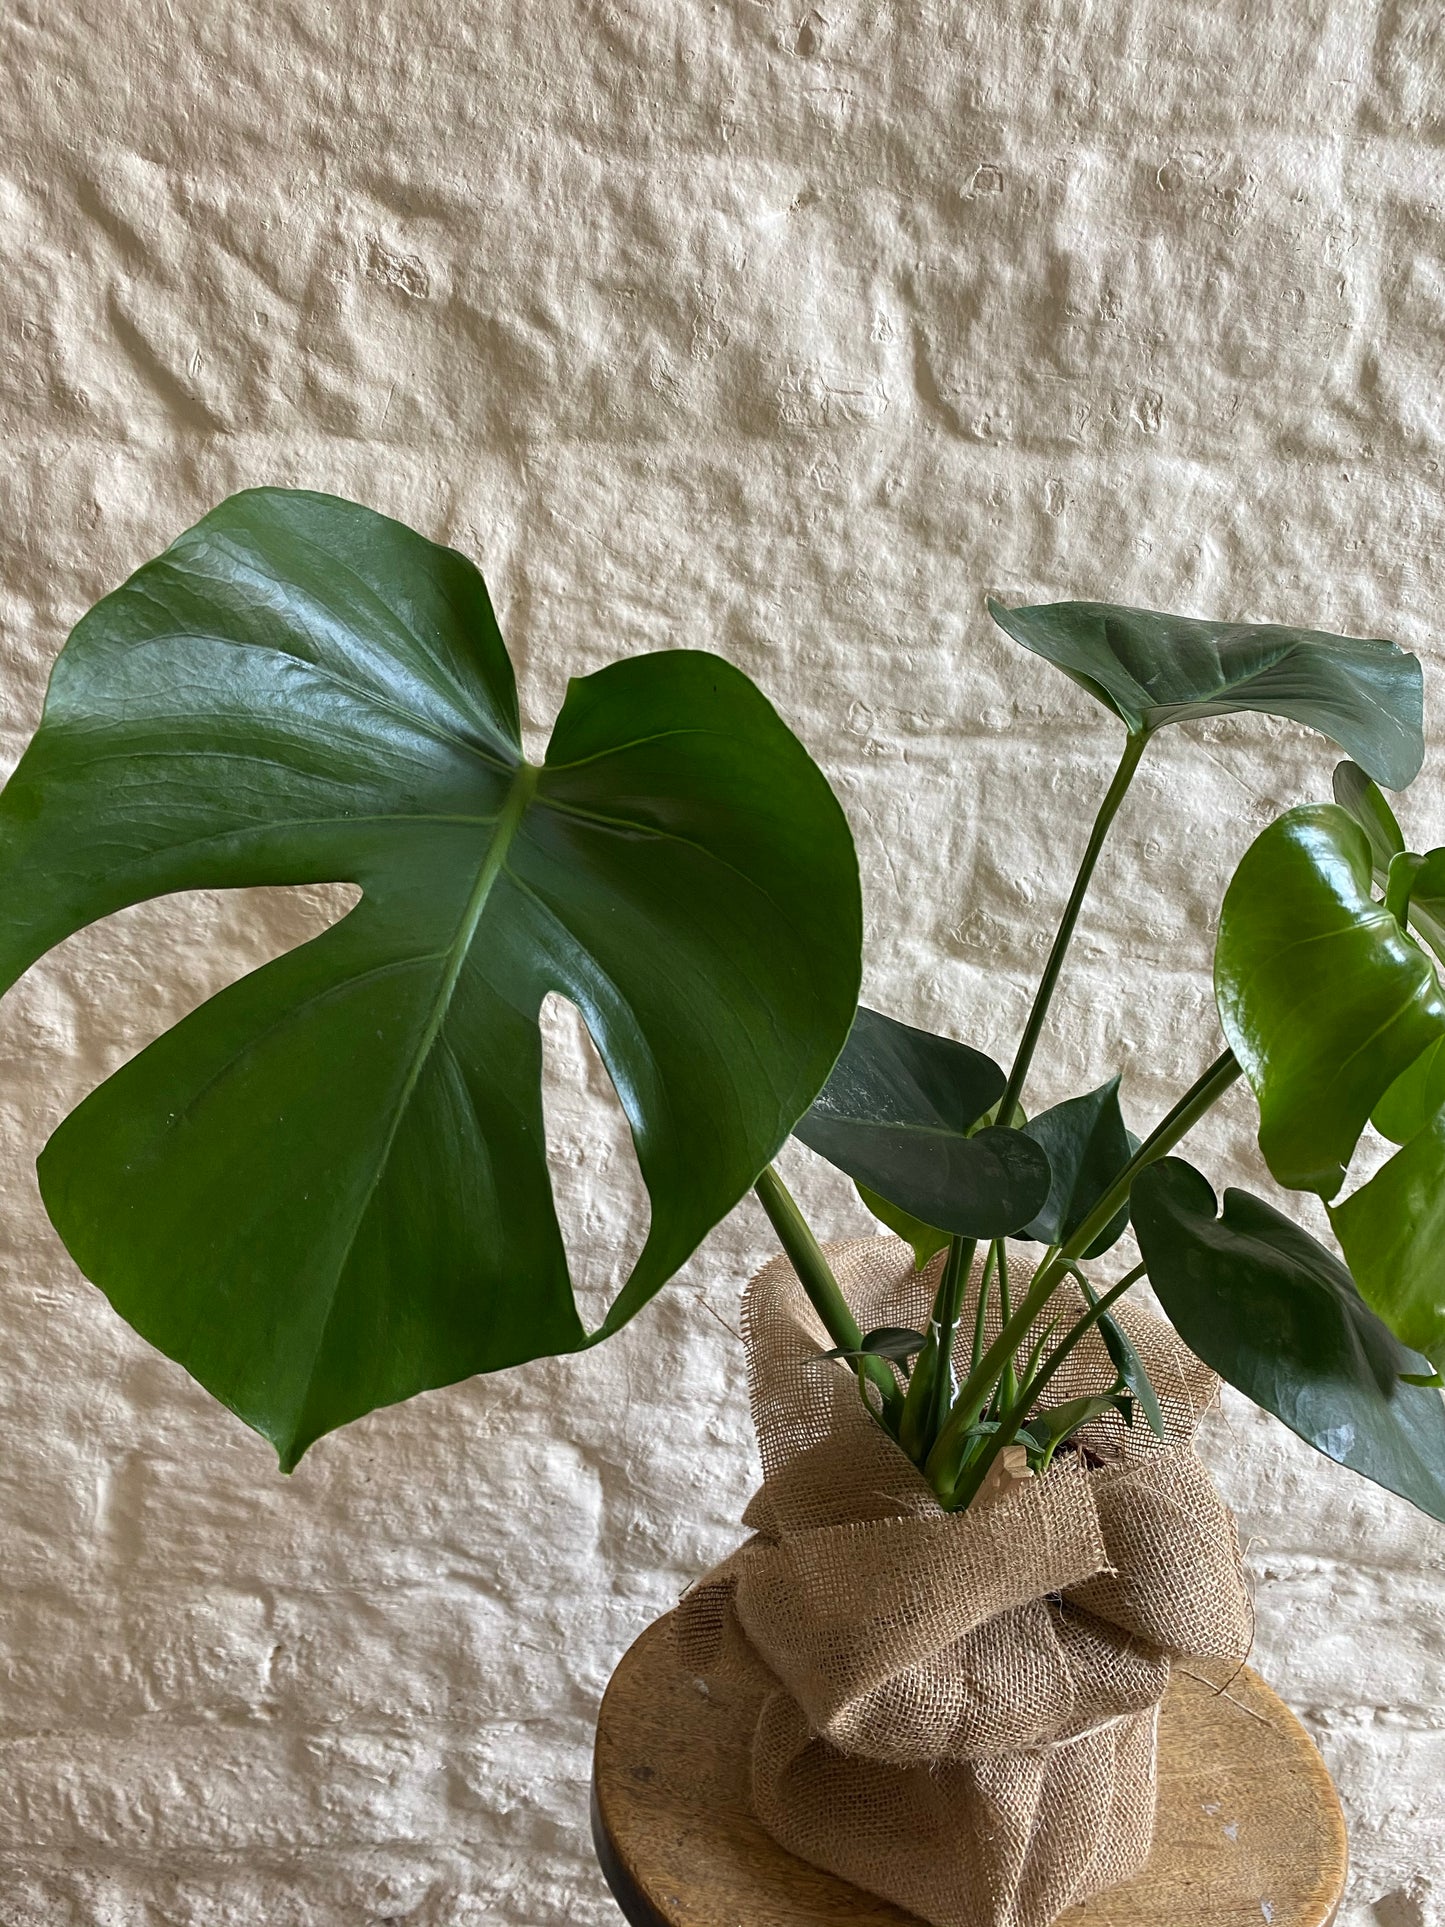 Monstera (Cheese Plant)